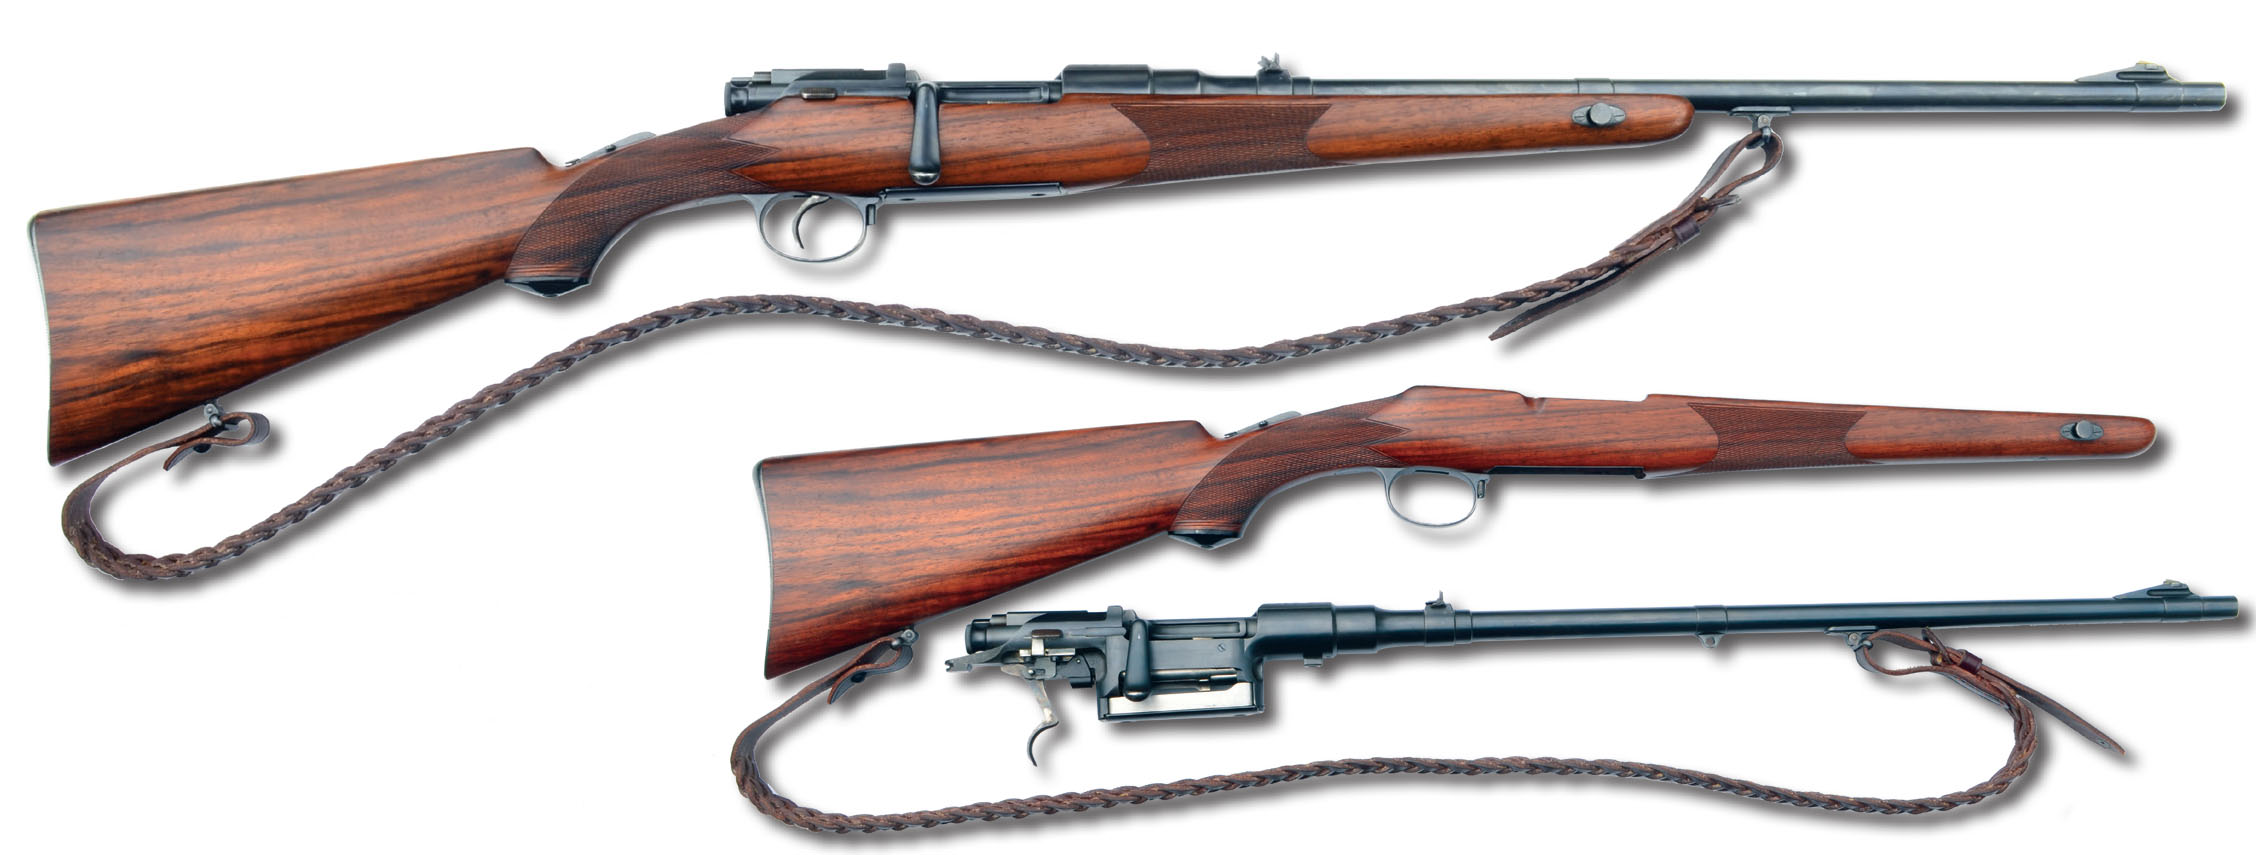 Mannlicher-Schönauer takedown rifle, probably built in the 1920s and recently (beautifully) restored. Dismantling actually saves little in the way of length, unlike the Savage and Dakota.